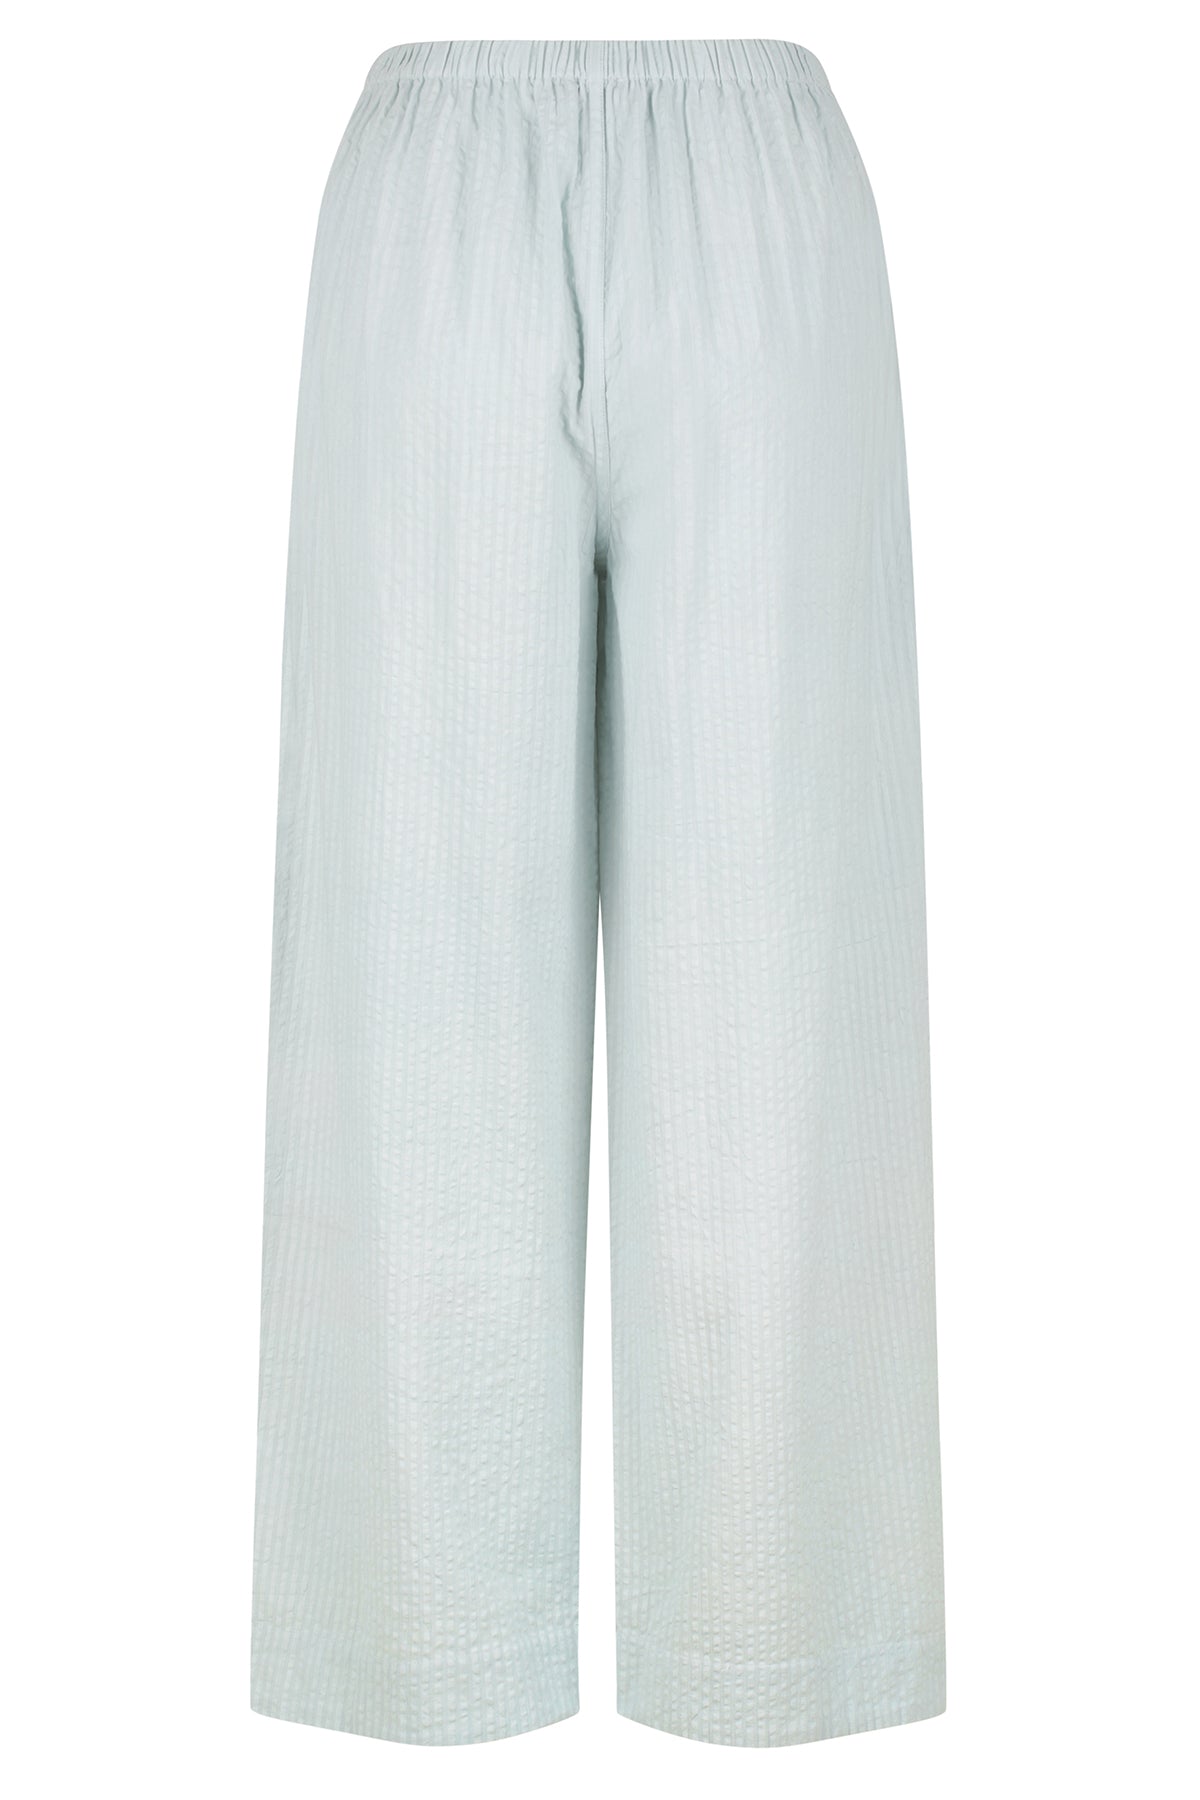 Sonnie Pant - Baby Blue